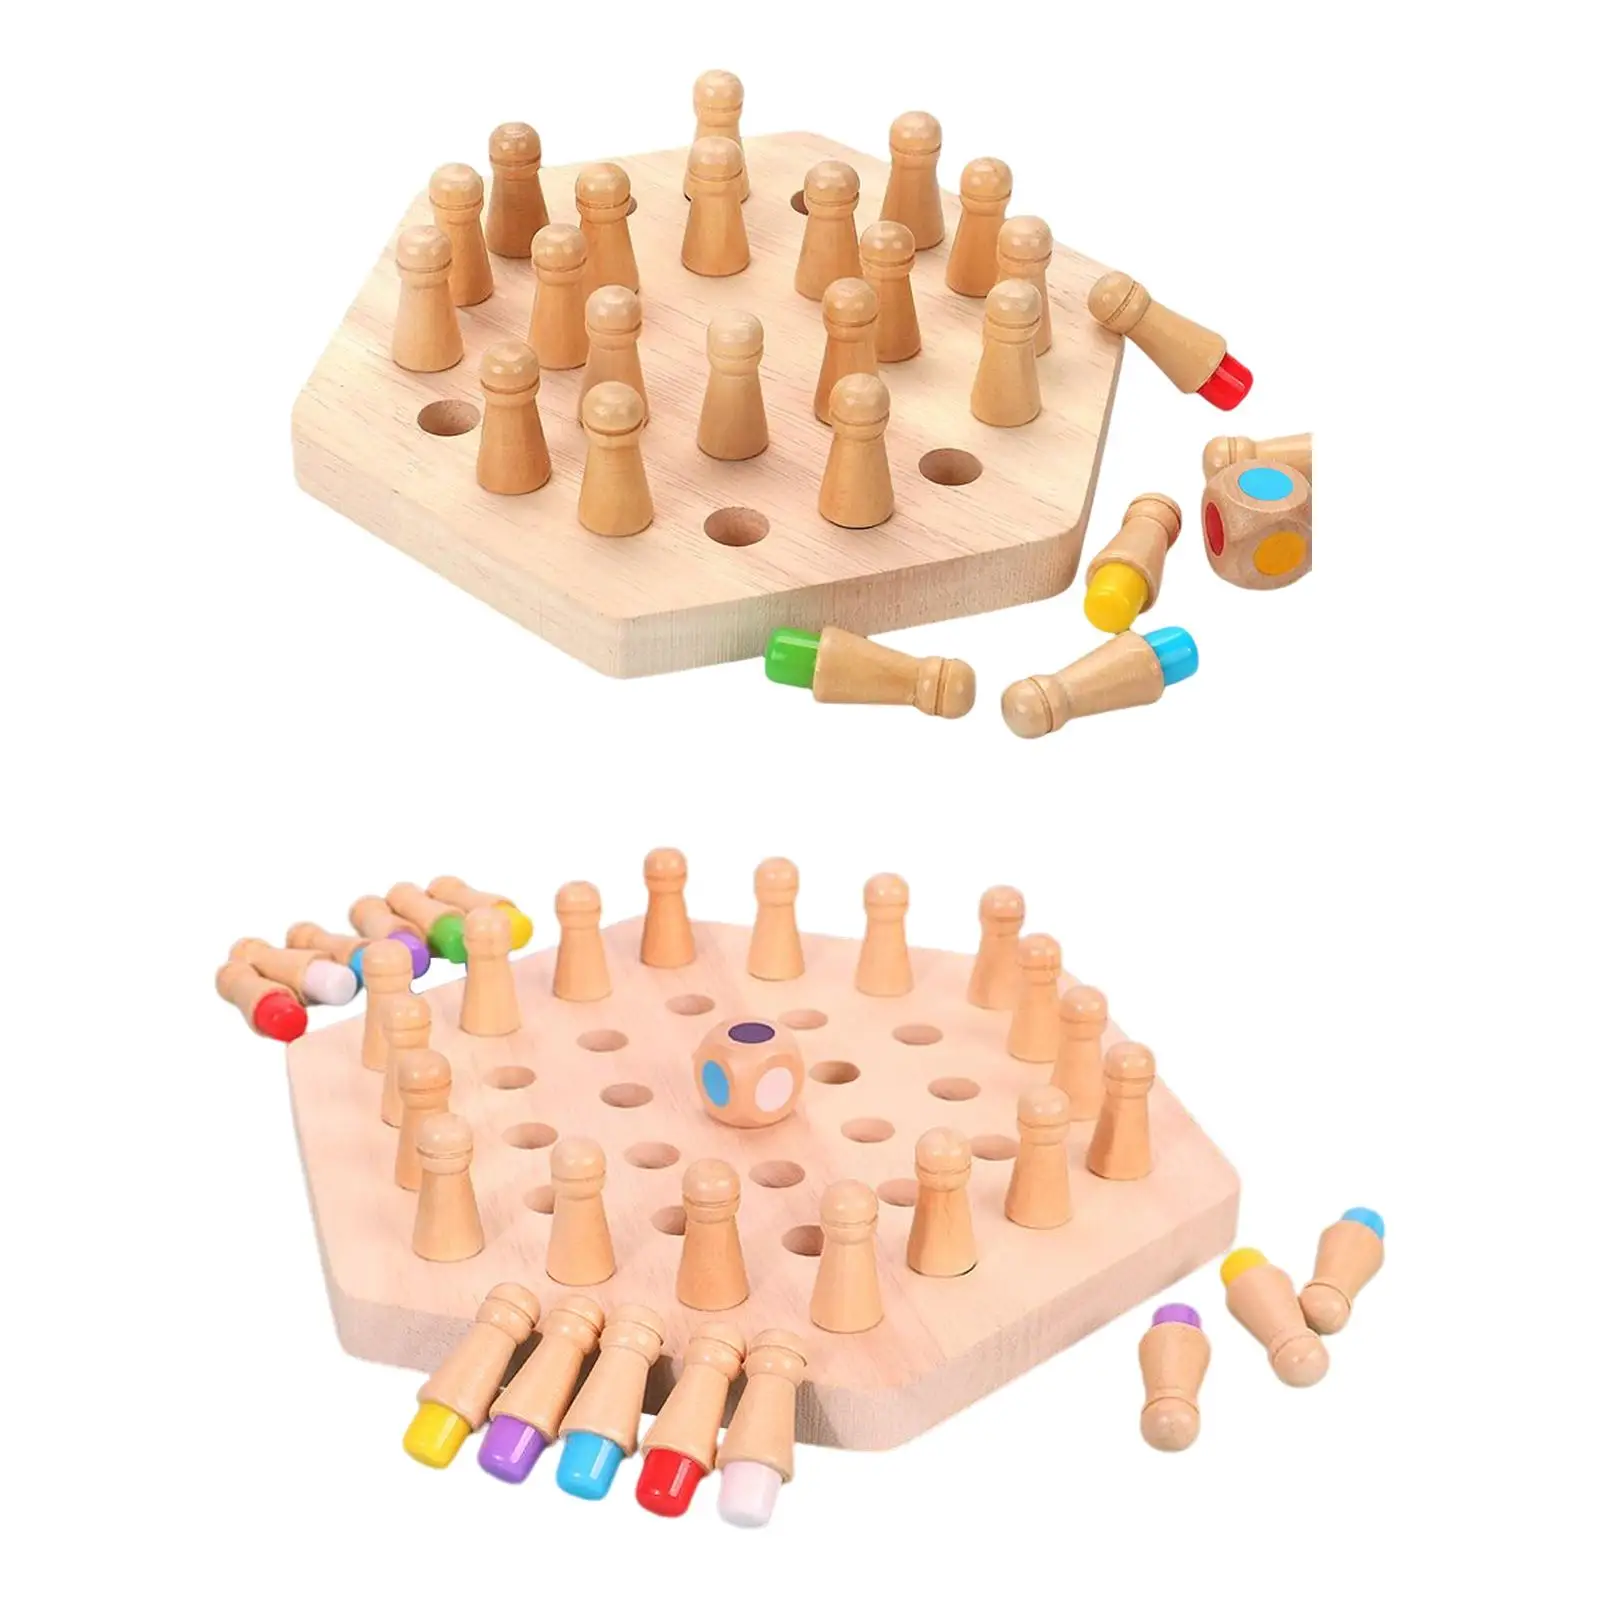 Wooden Memory Chess Game for Parent Child Development Toy Puzzle Game